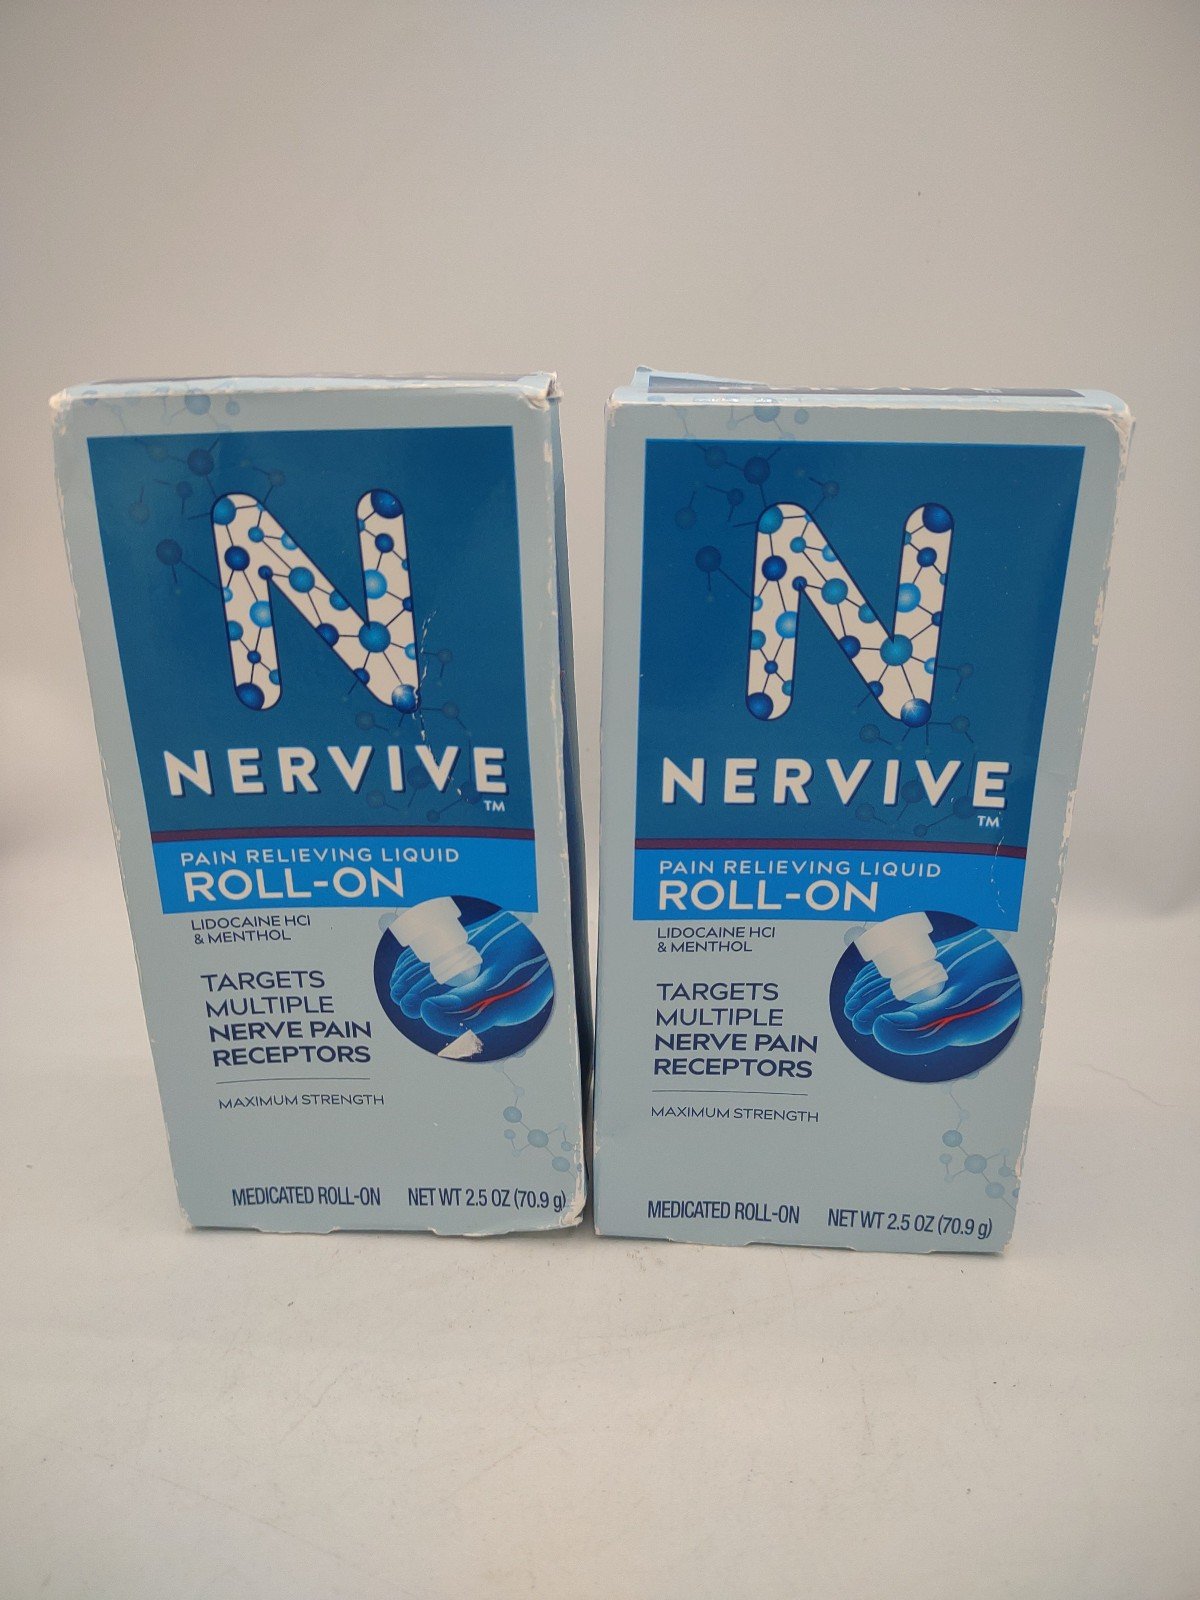 Nervive Nerve relief roll-on pain reliever relieving topical 2023 fjwHVnXPA